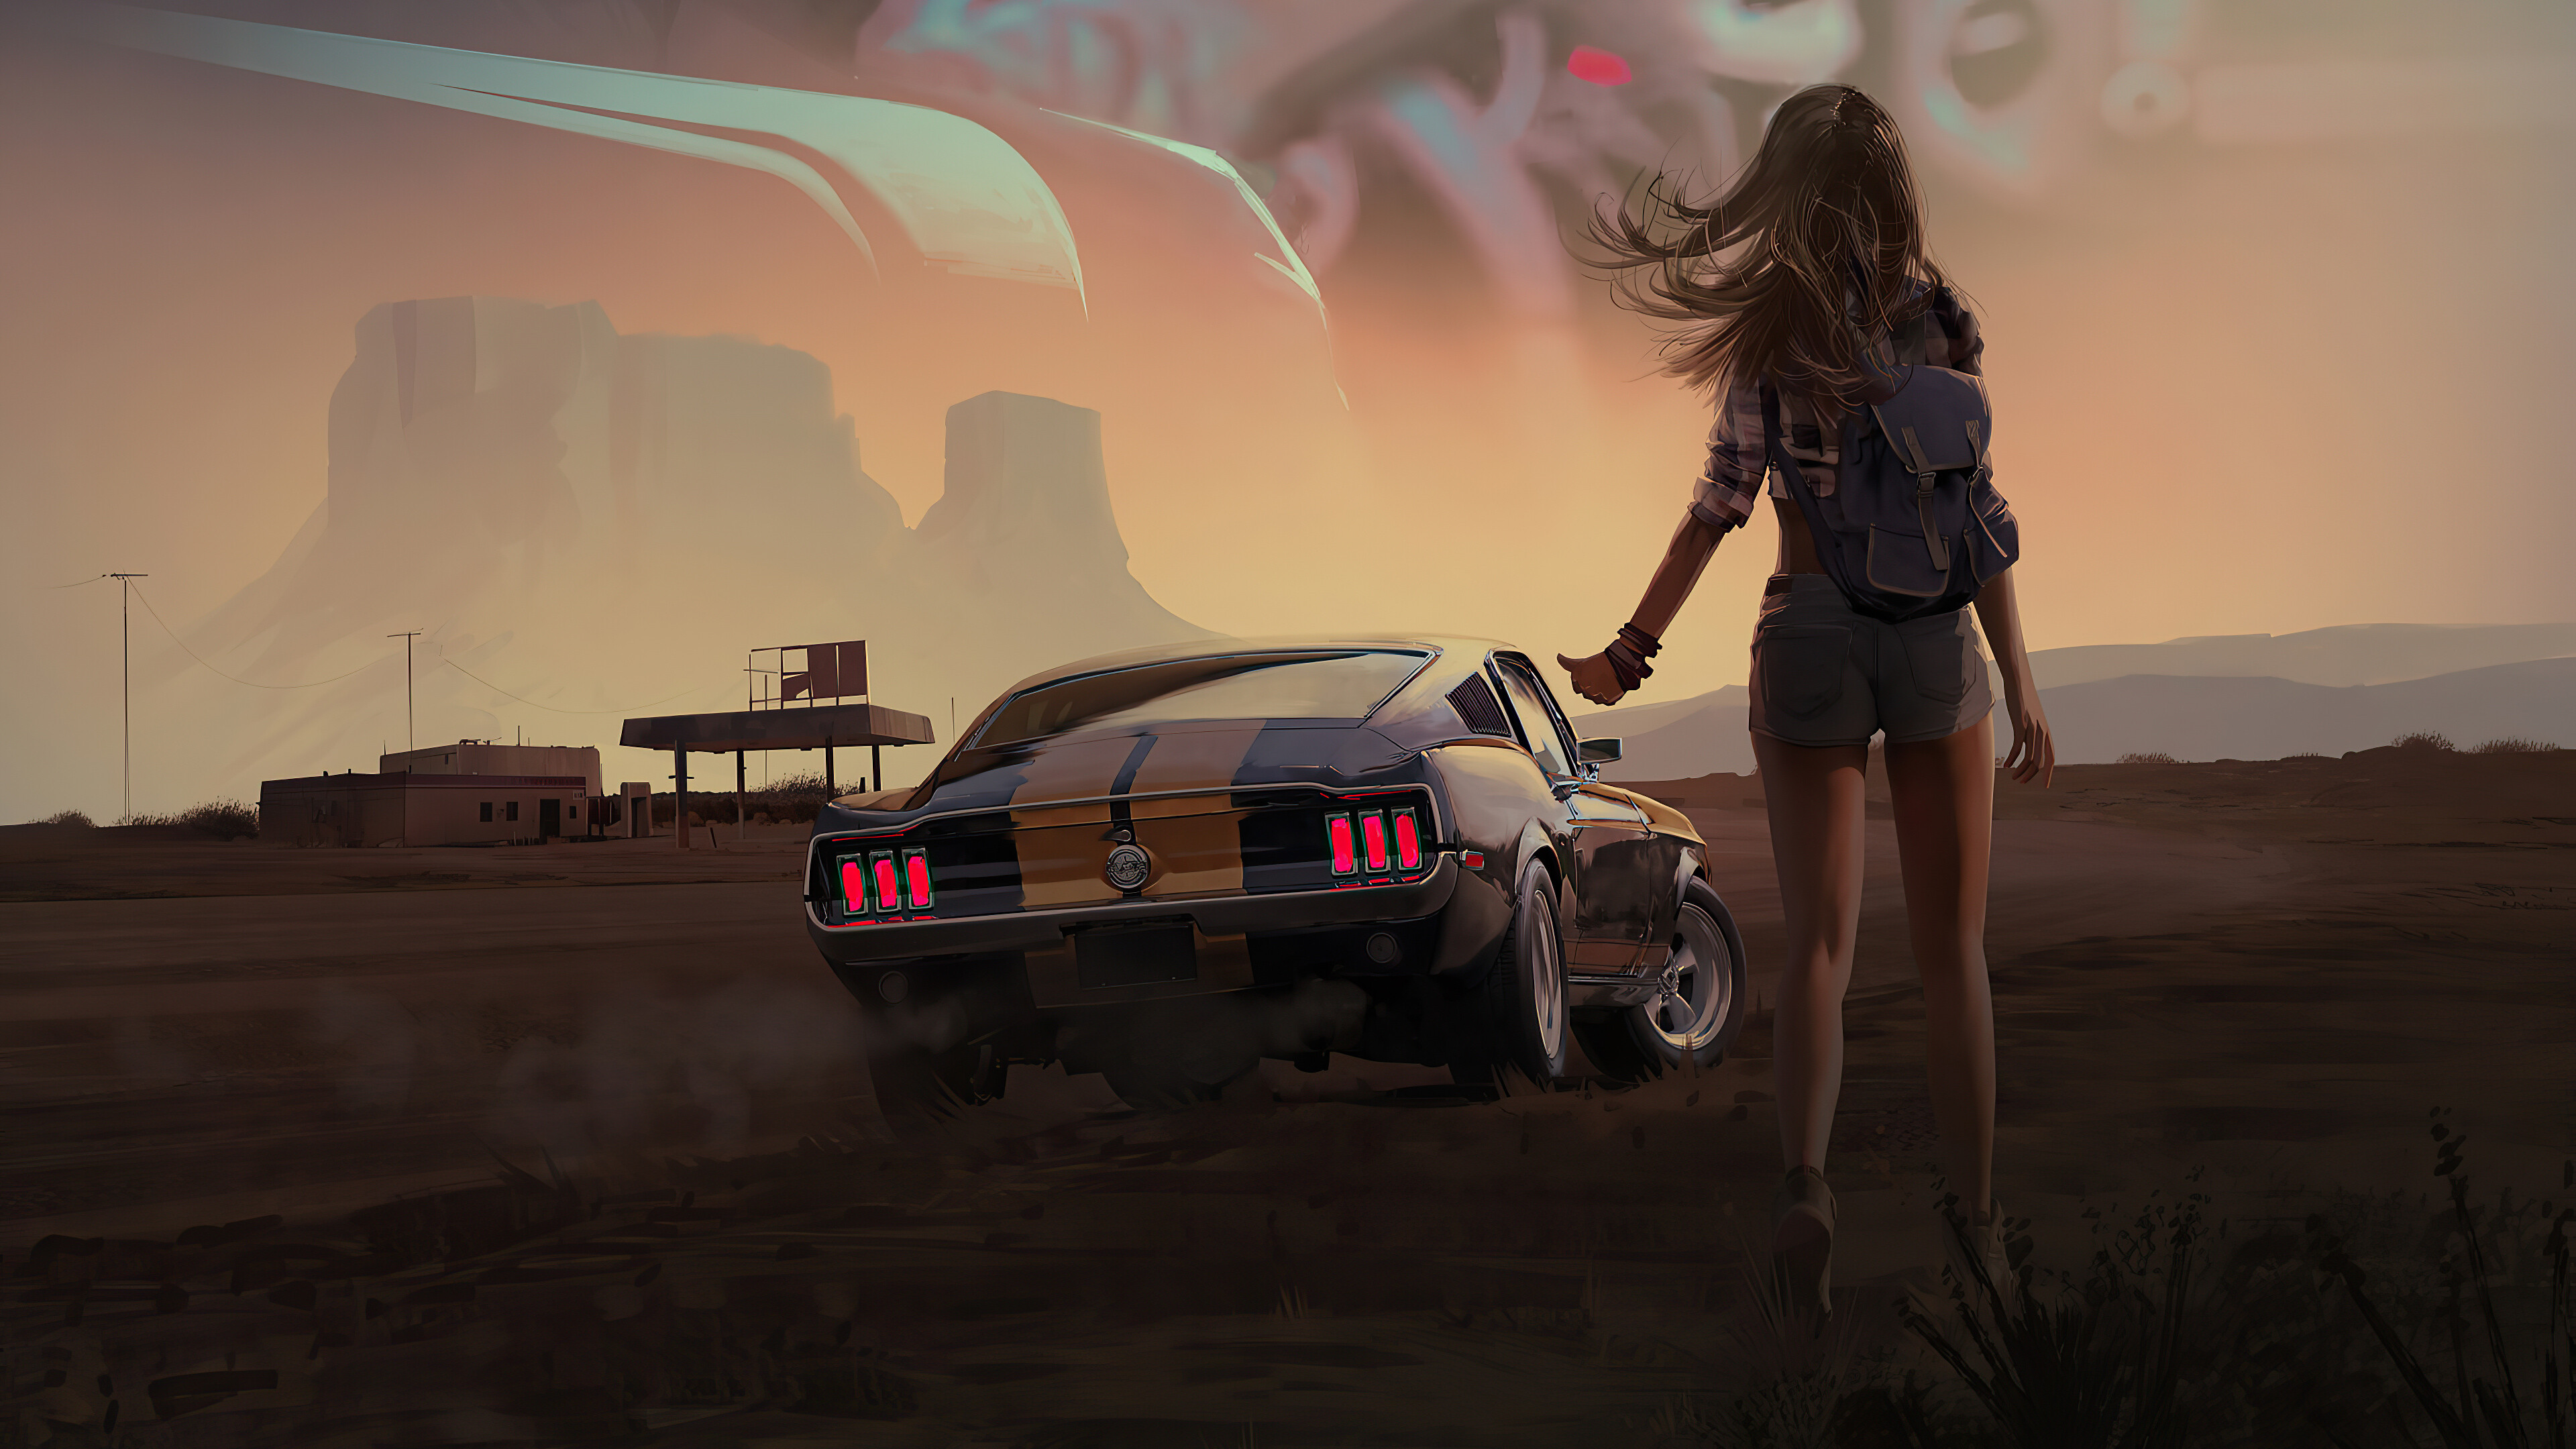 Girls and Muscle Cars: Ford Mustang GT Fastback 1965, Hitchhiking, The woman standing at the edge of a road. 3840x2160 4K Background.